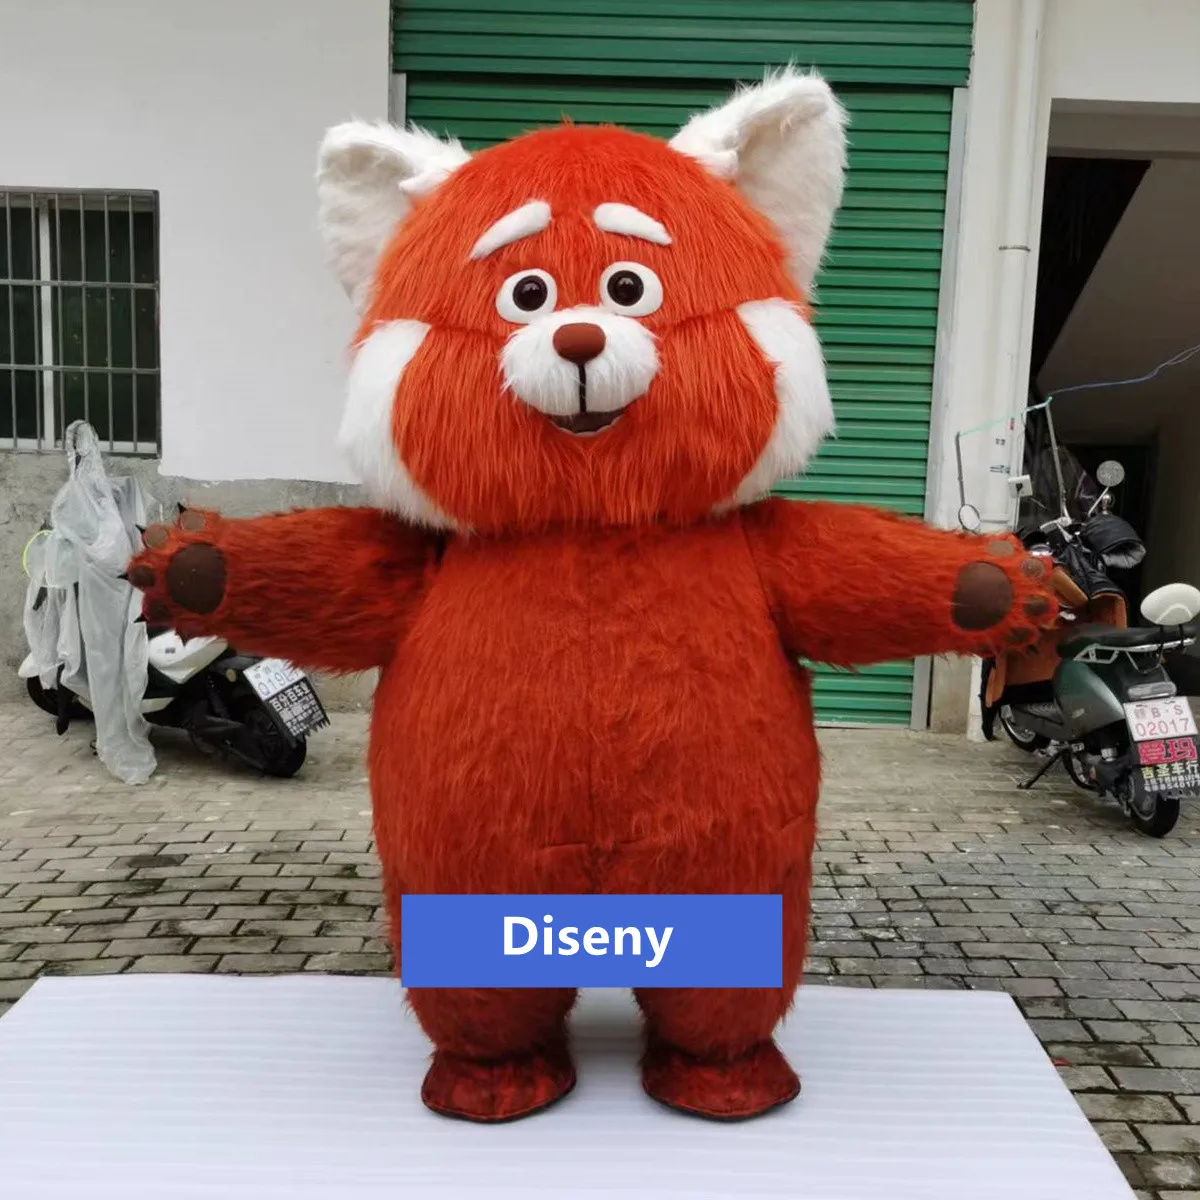 Cosplay Disney 200cm Pixar Turning Red Inflatable Bear Mascot Costume Advertising Costume Fancy Dress Party Animal carnival 3m inflatable bear mascot costume suitable for adults 150 200cm kawaii teddy bear quick inflatable cosplay set